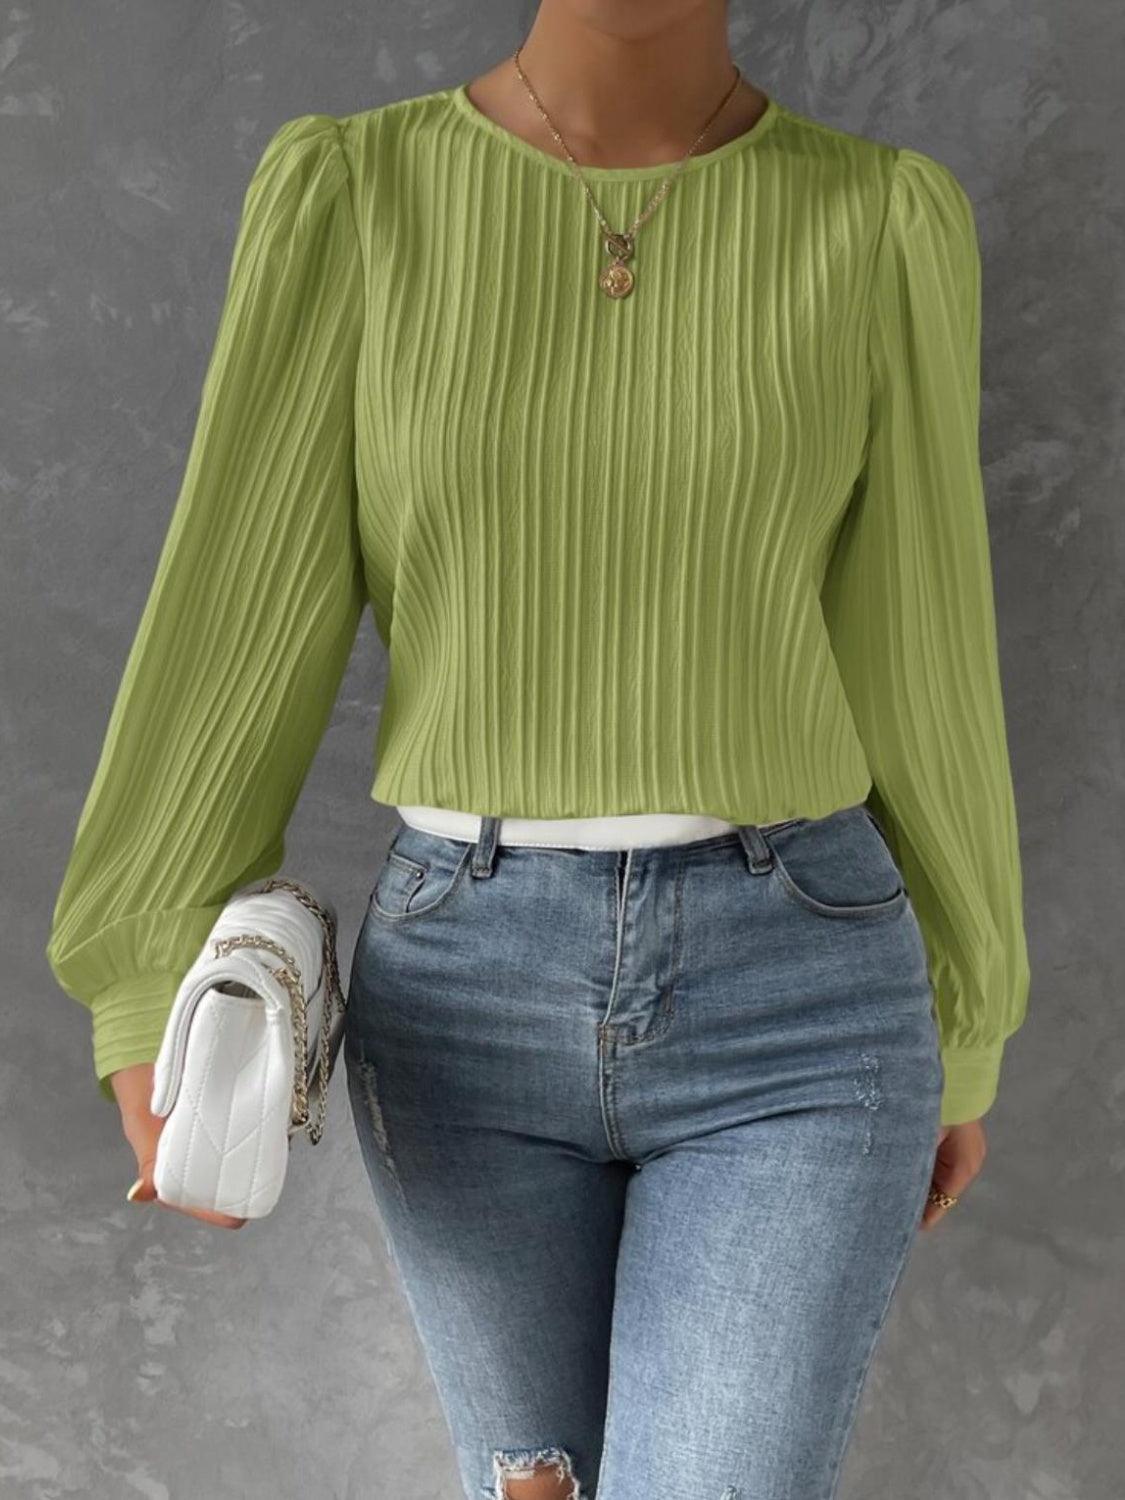 a woman wearing a green top and ripped jeans